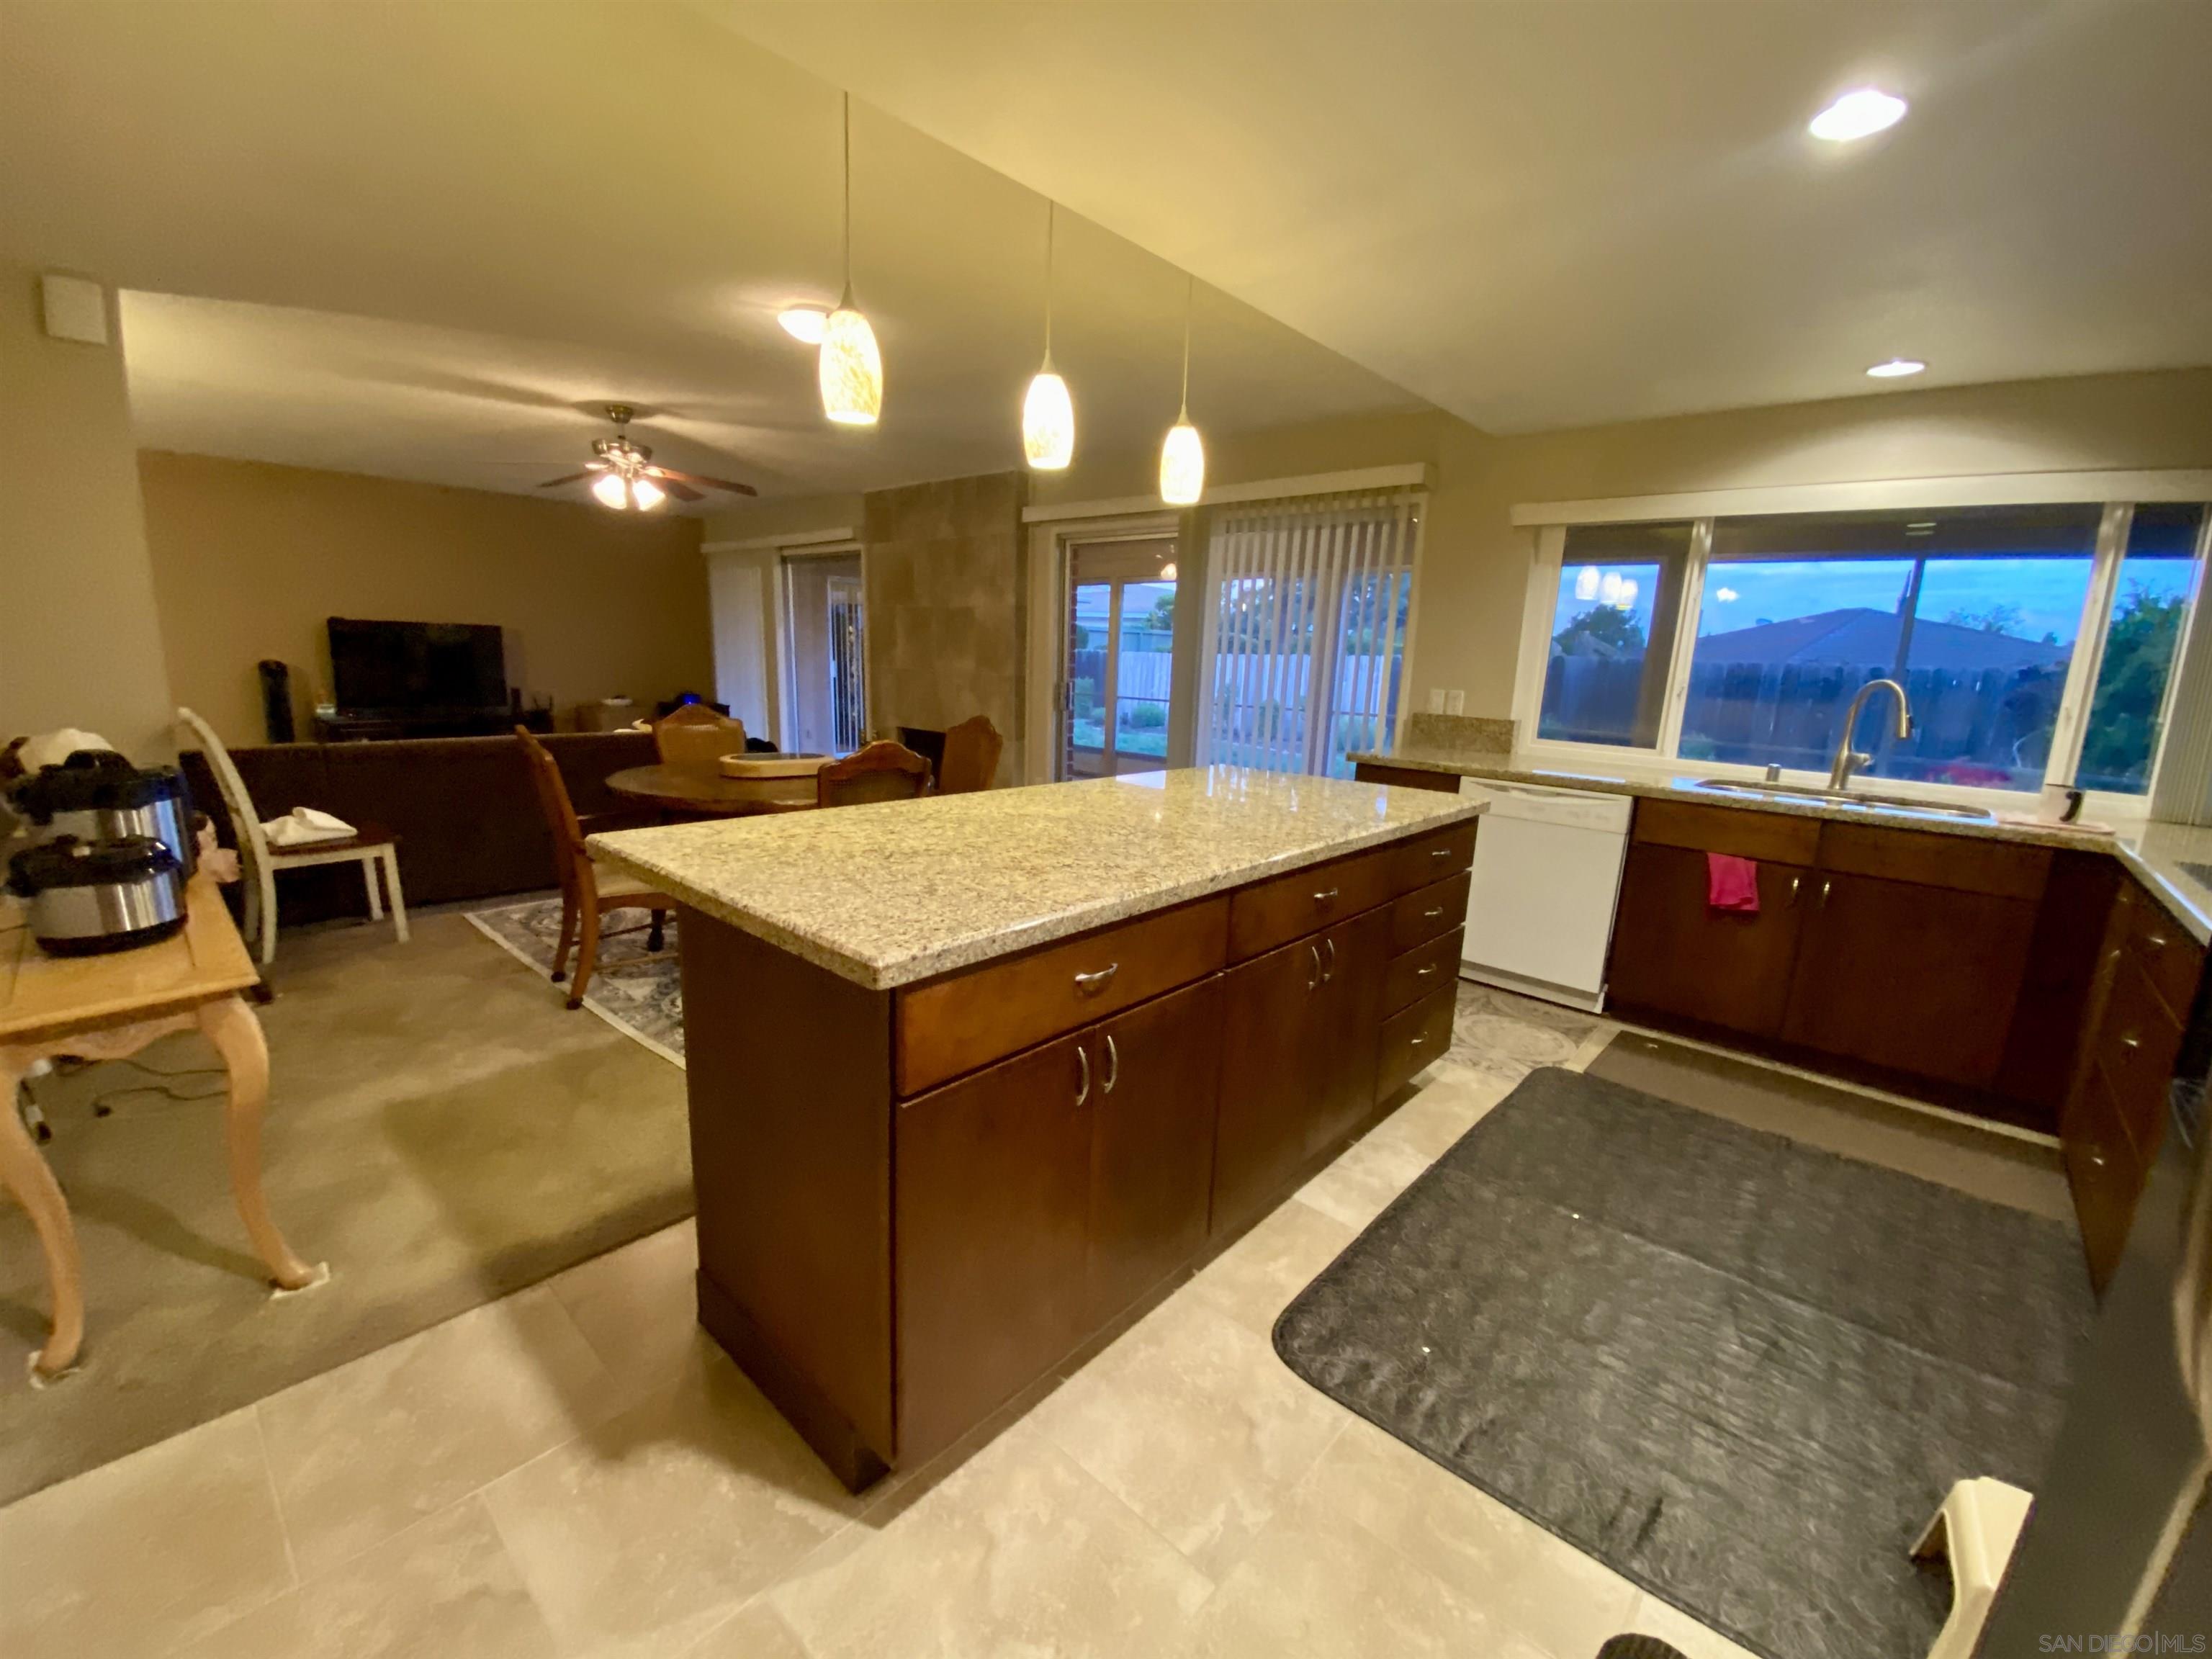 a room with lots of counter top space